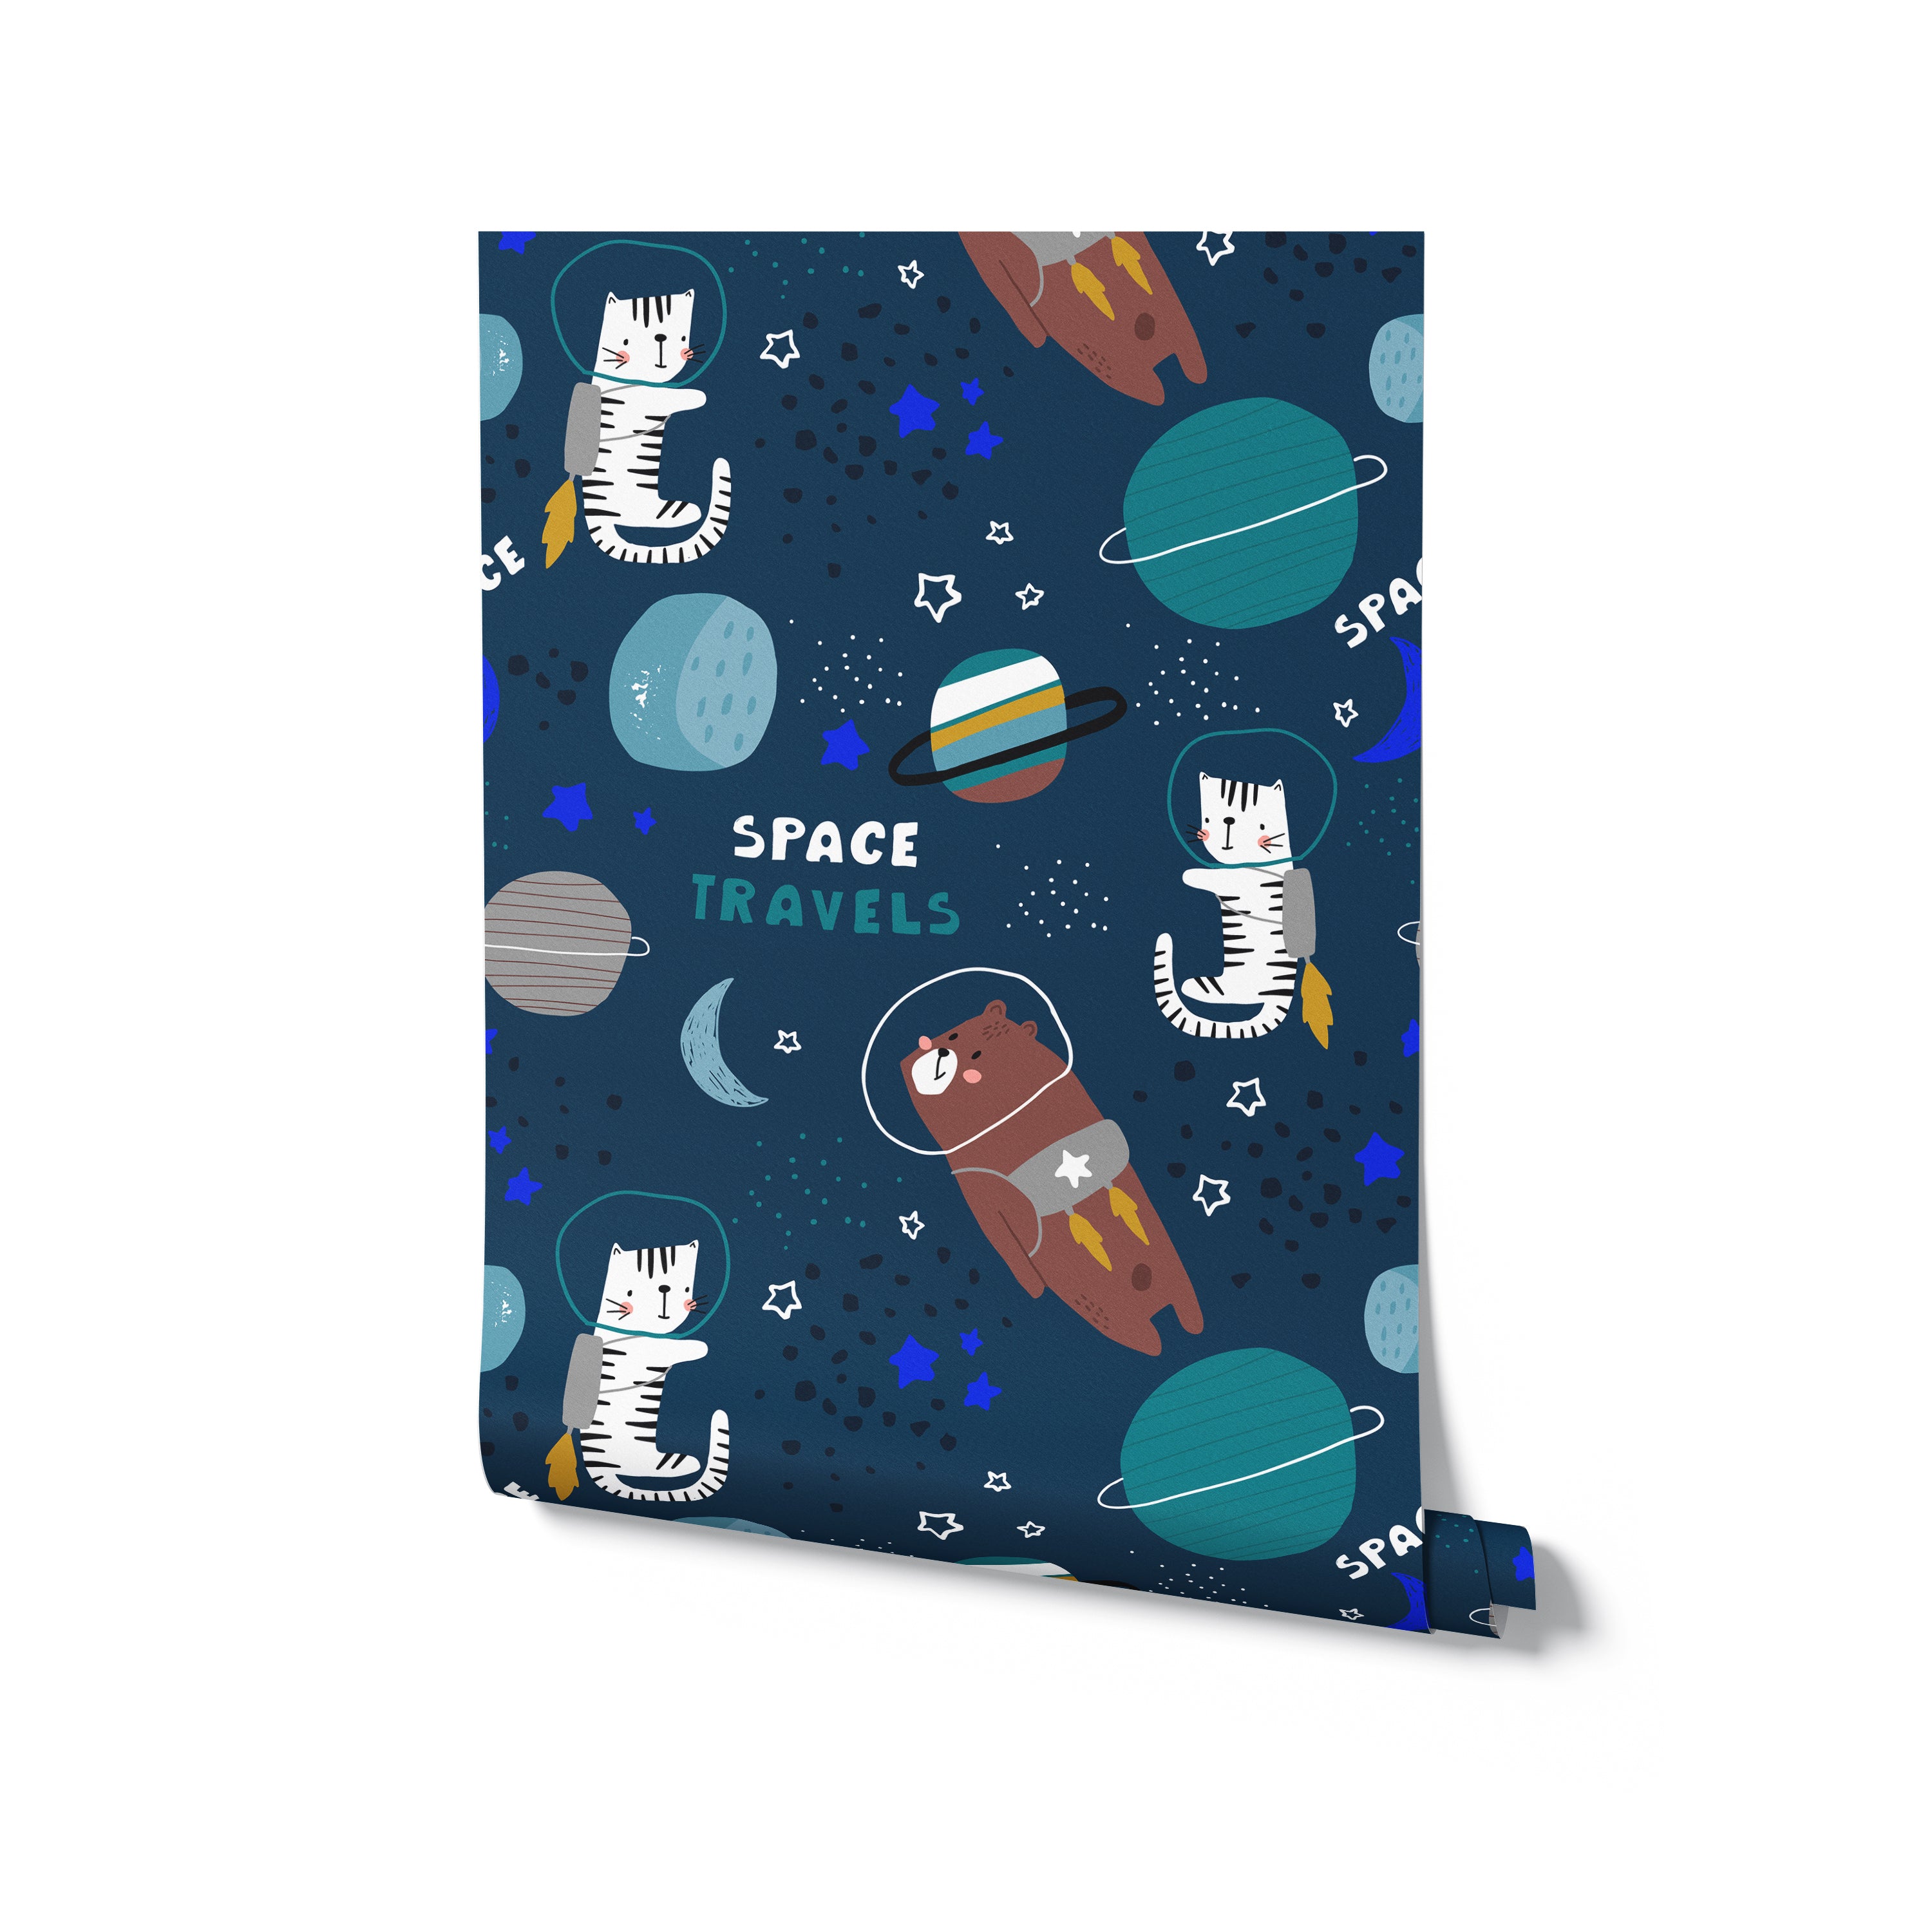 A close-up of the space-themed wallpaper, showcasing playful illustrations of bears and tigers in space helmets with jetpacks, surrounded by stars, planets, and moons, set against a dark blue background. The pattern is lively and whimsical.